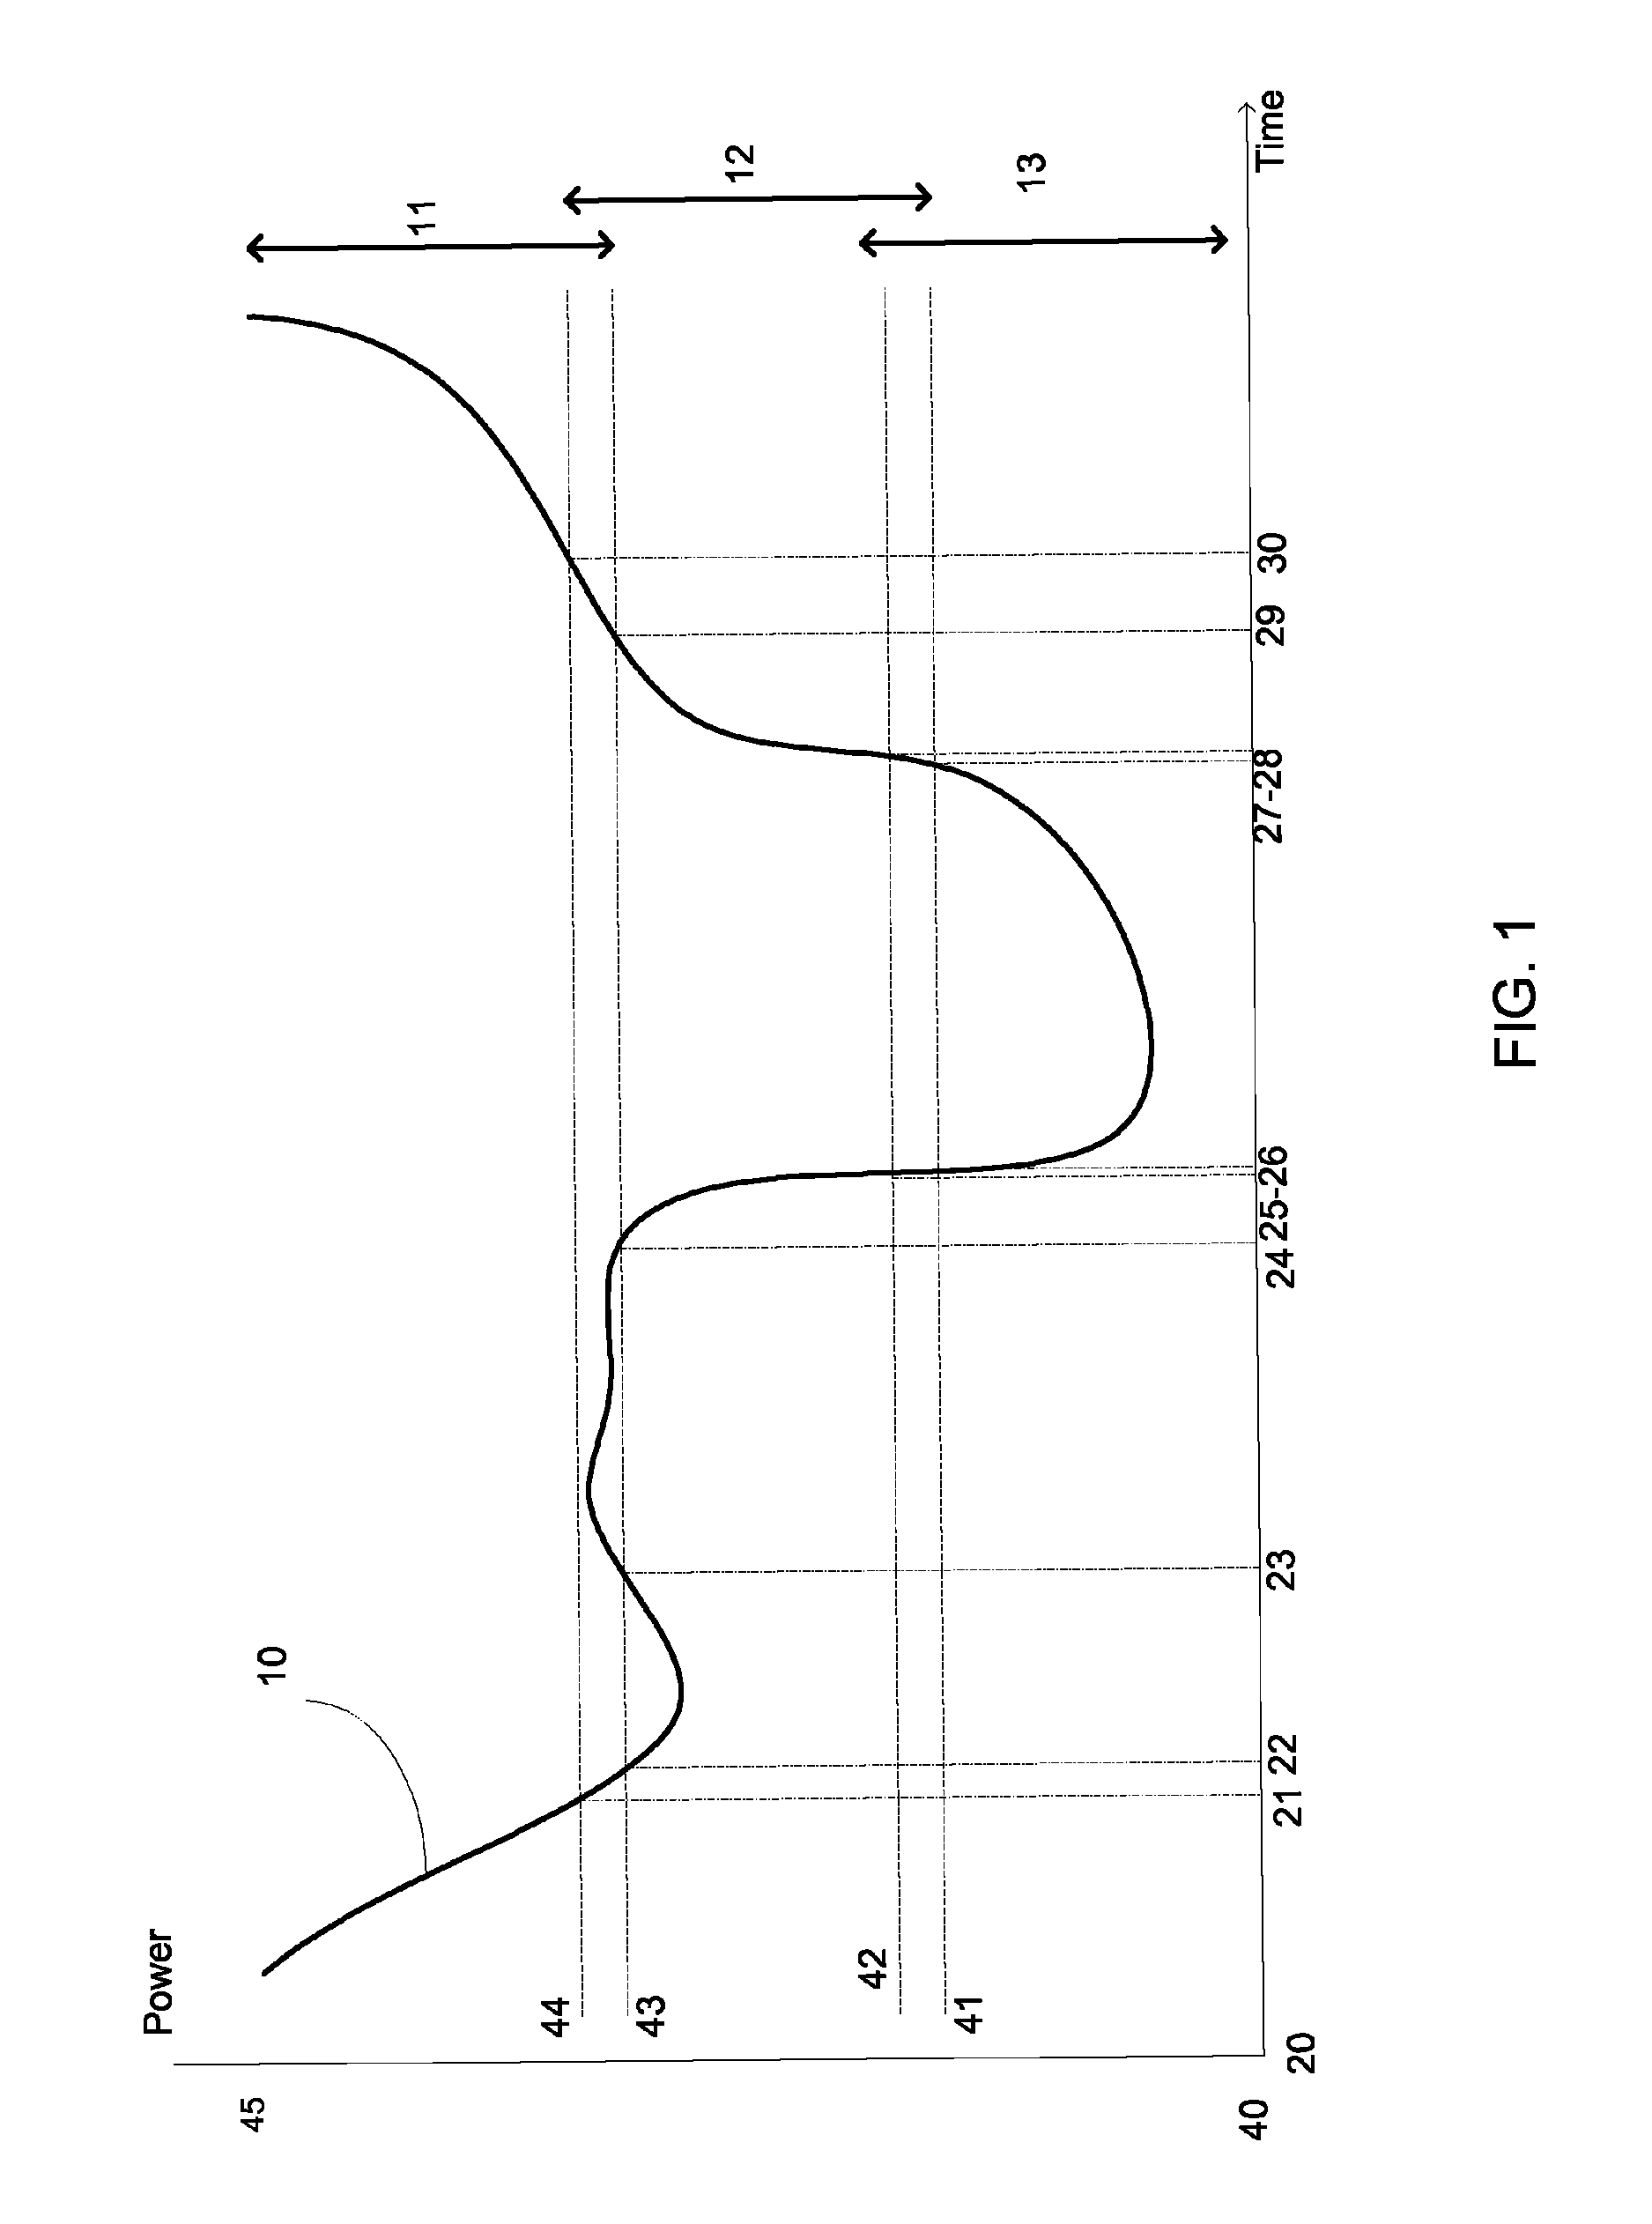 System and a method for amplifying a signal by multiple non-linear power amplifiers